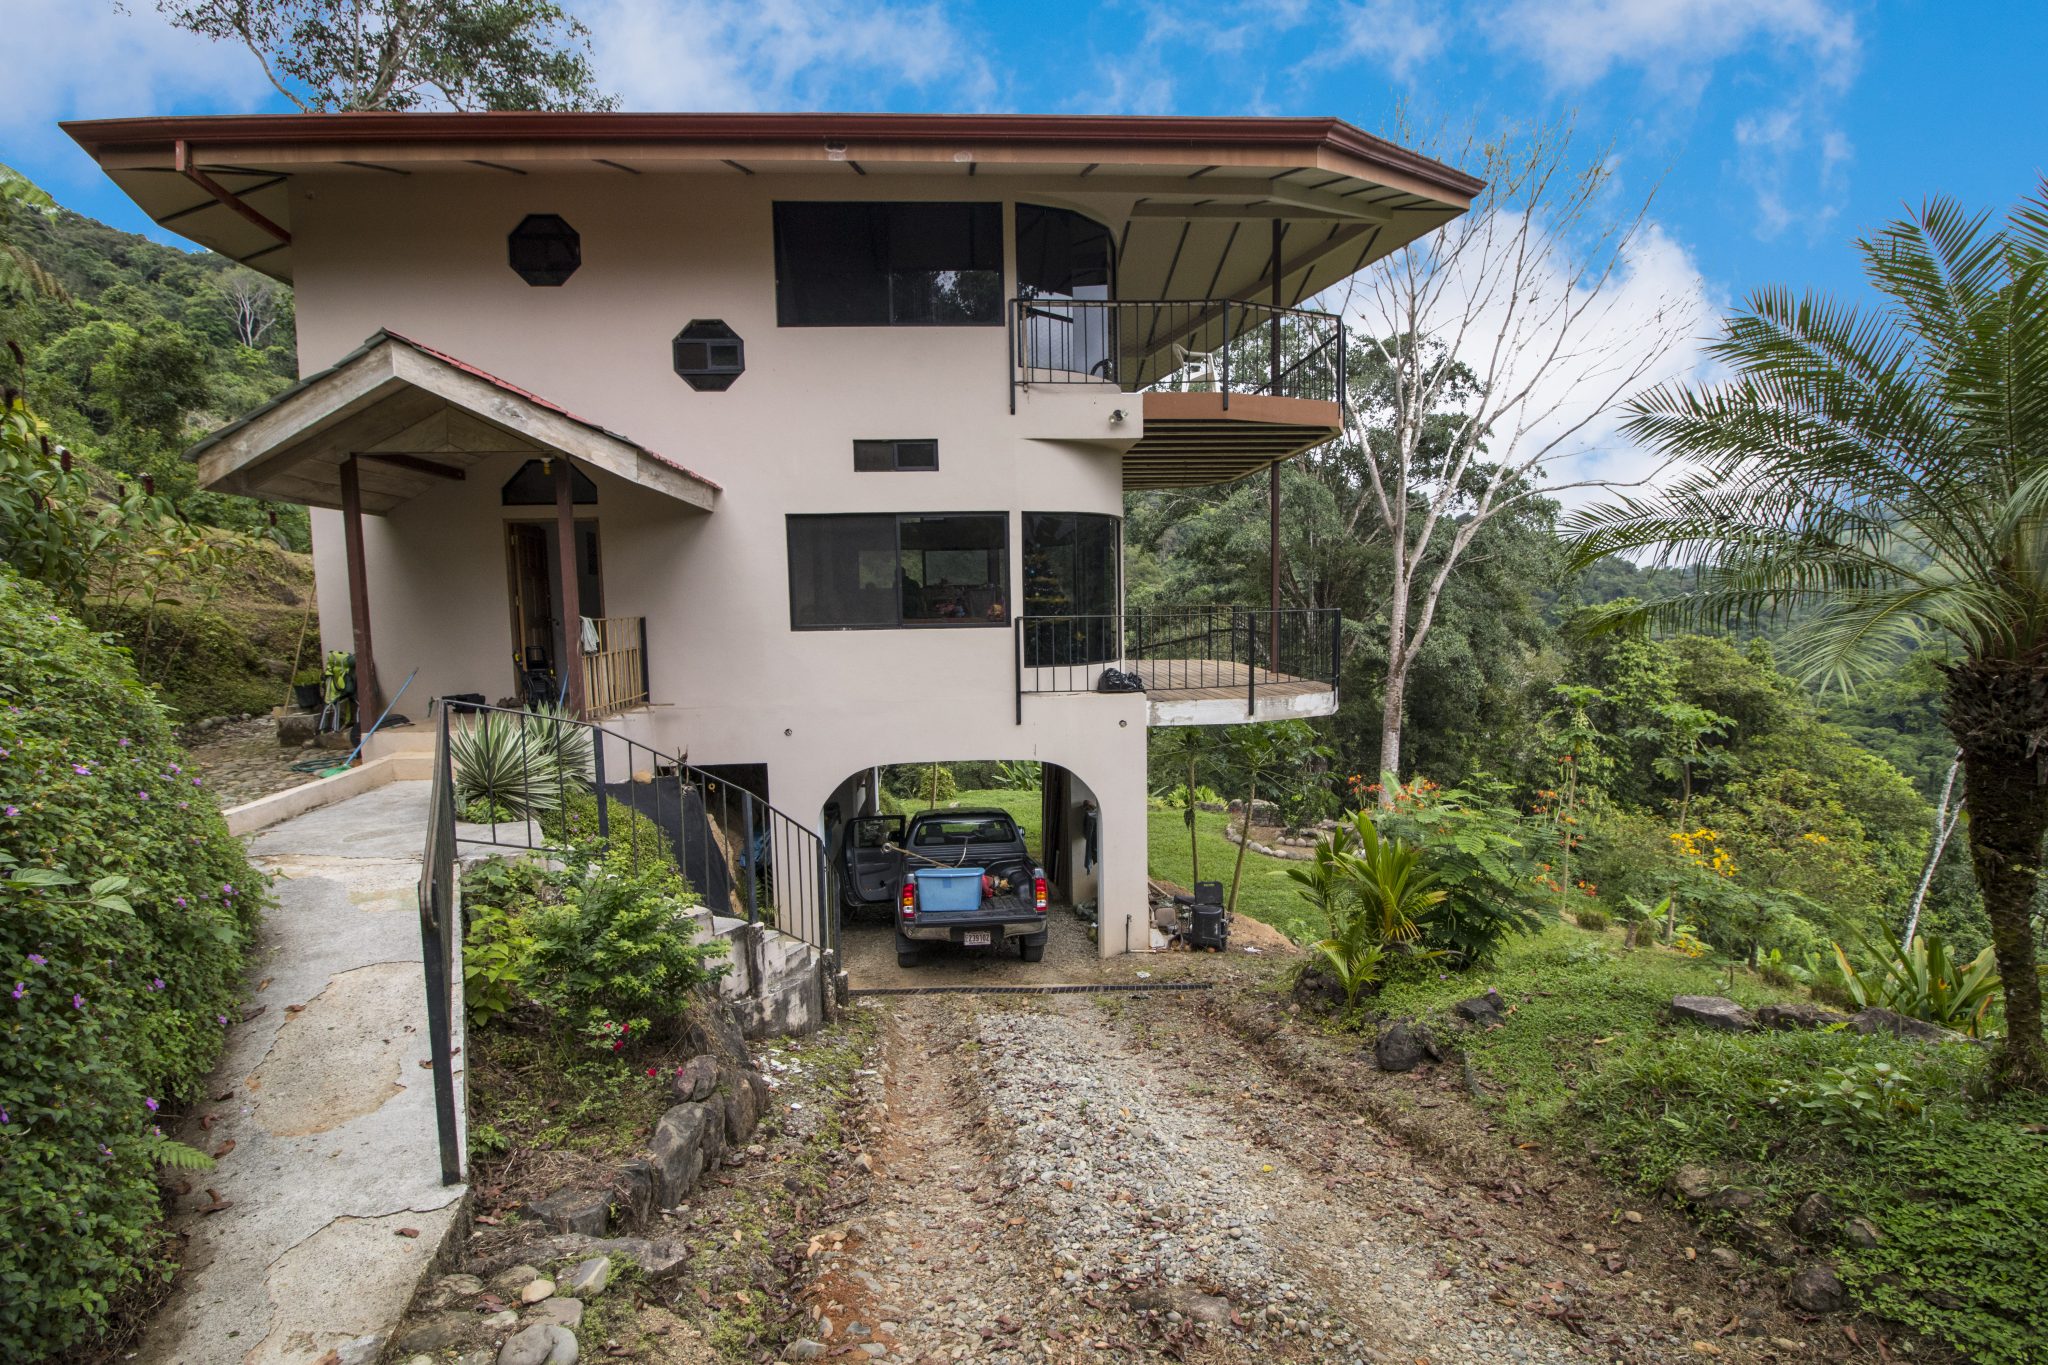 1.24 ACRES - Two Bedroom, Open Architecture, Spectacular Valley and Mountain View, Very Private, 15 Minutes From Dominical!!!